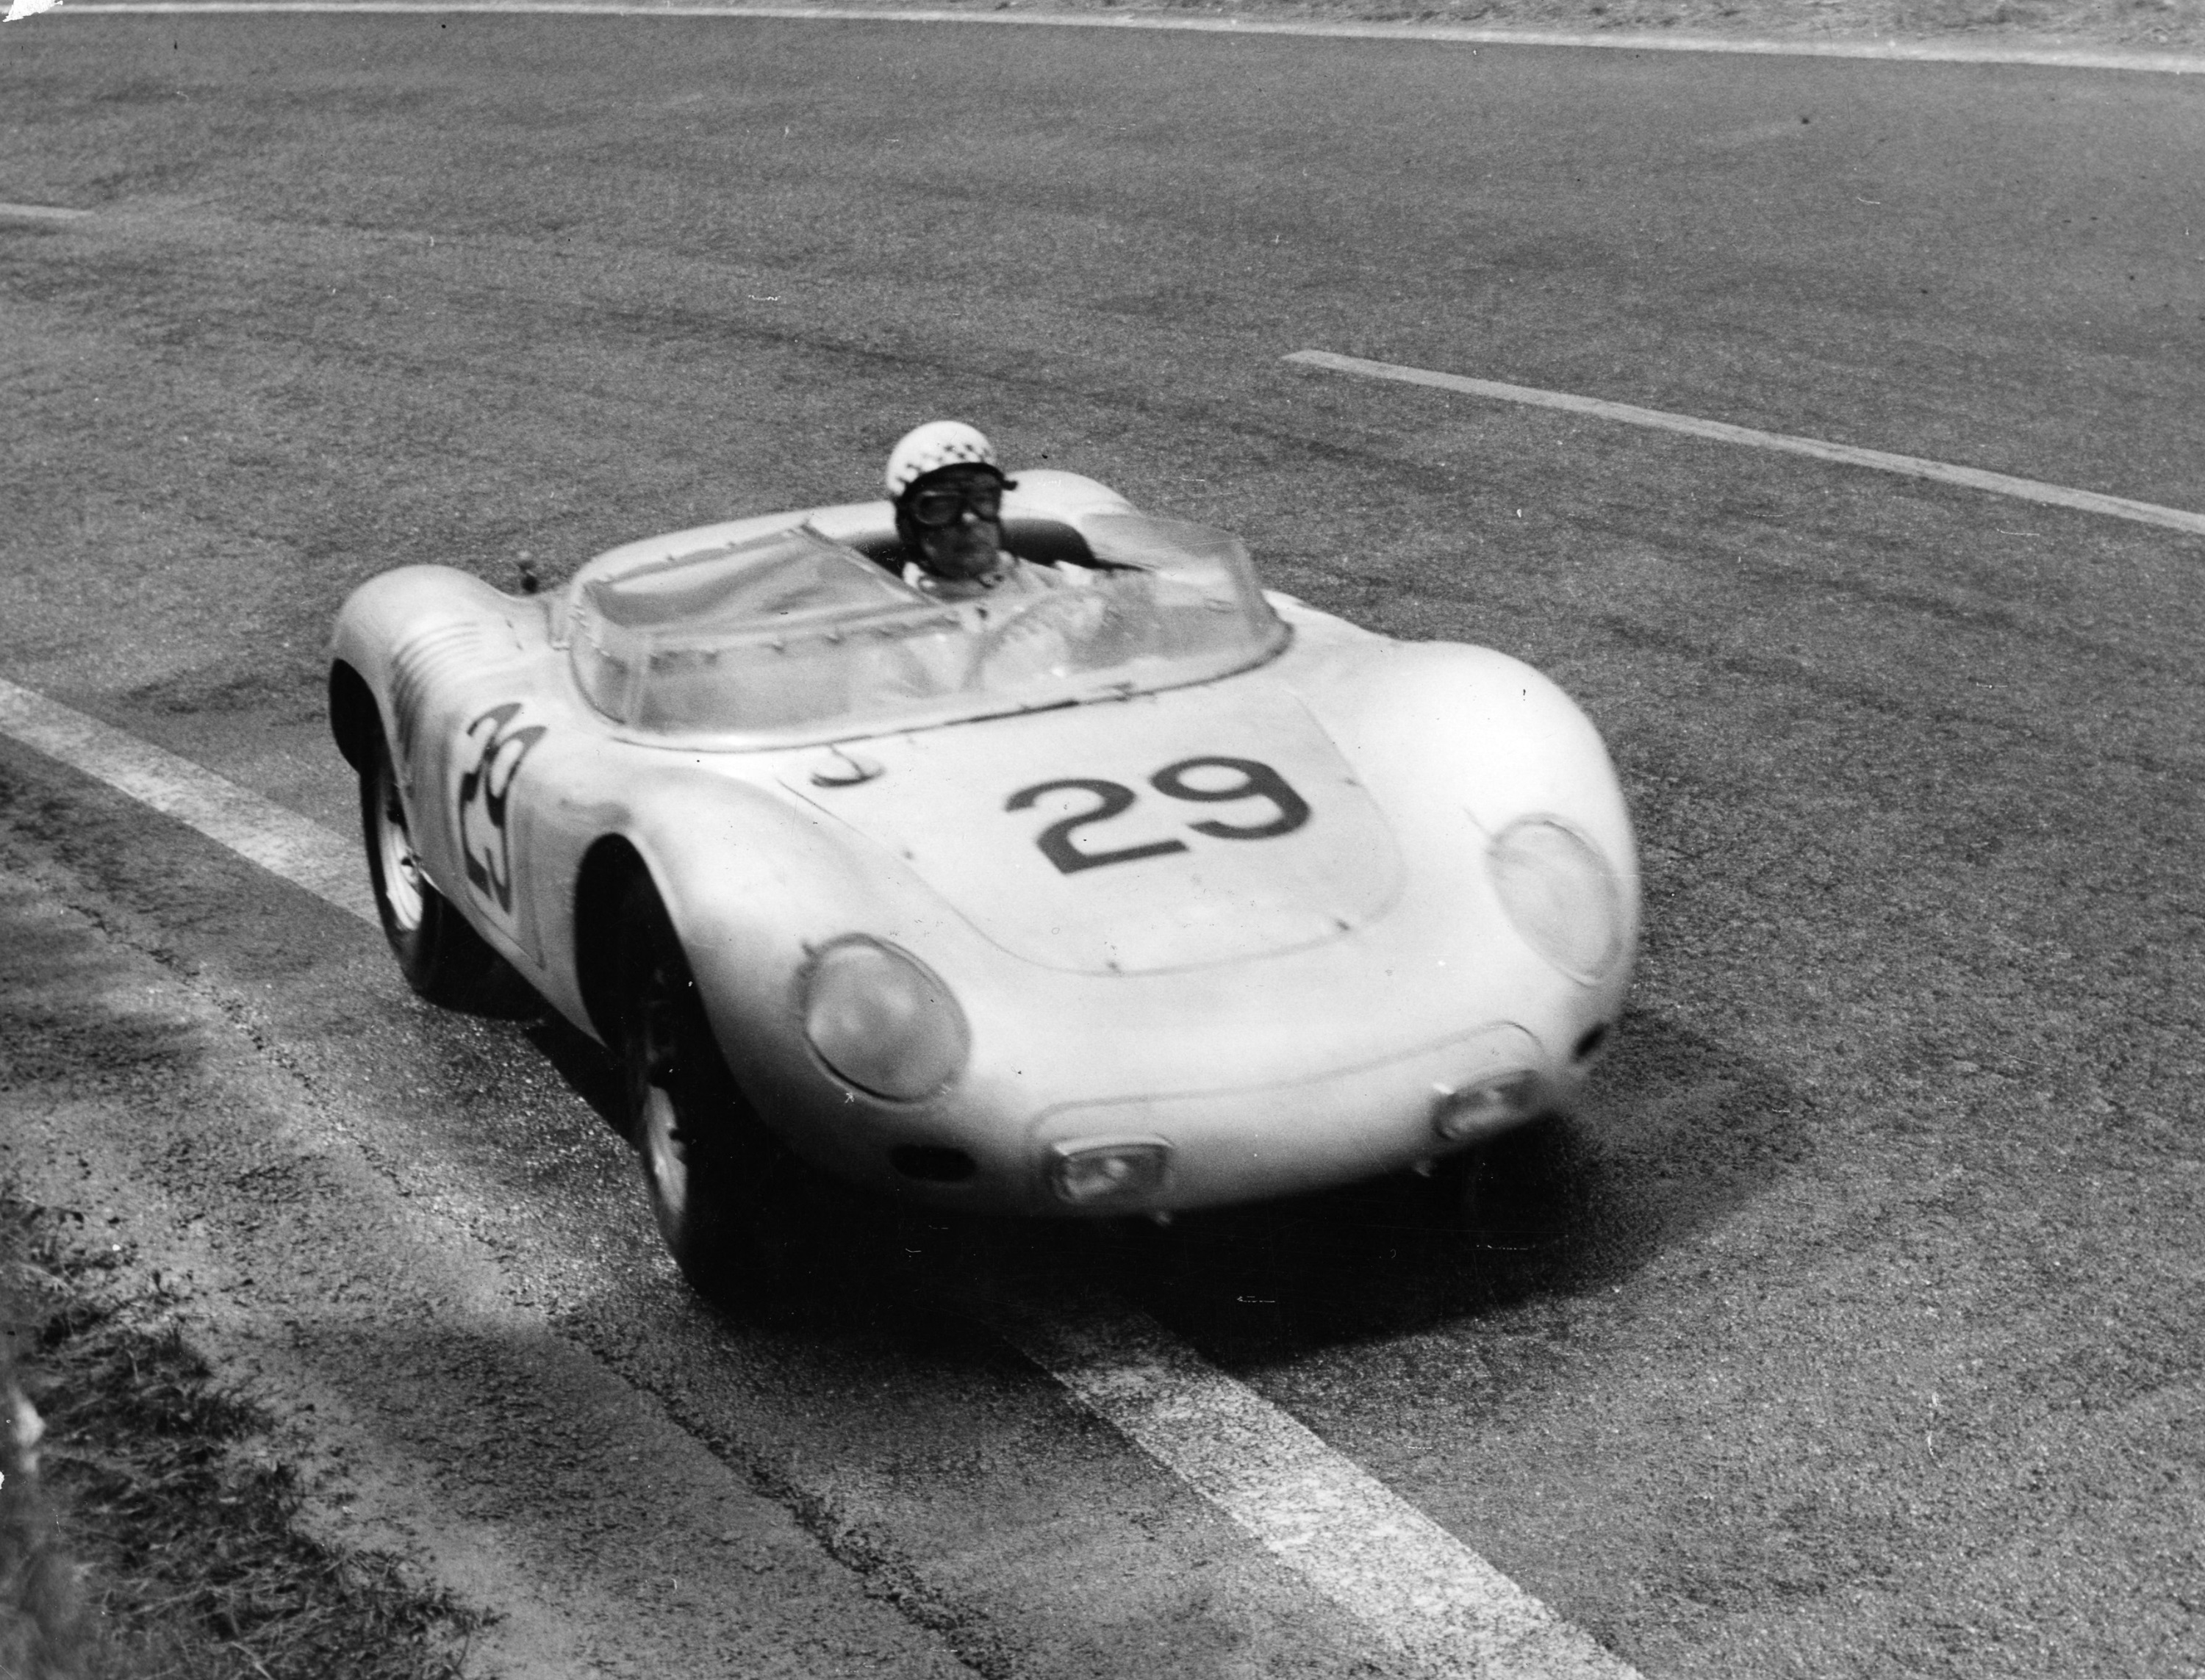 Though the Porsche 718 has known many versions, it represents a cornerstone for Porsche in its goal to conquer Le Mans.